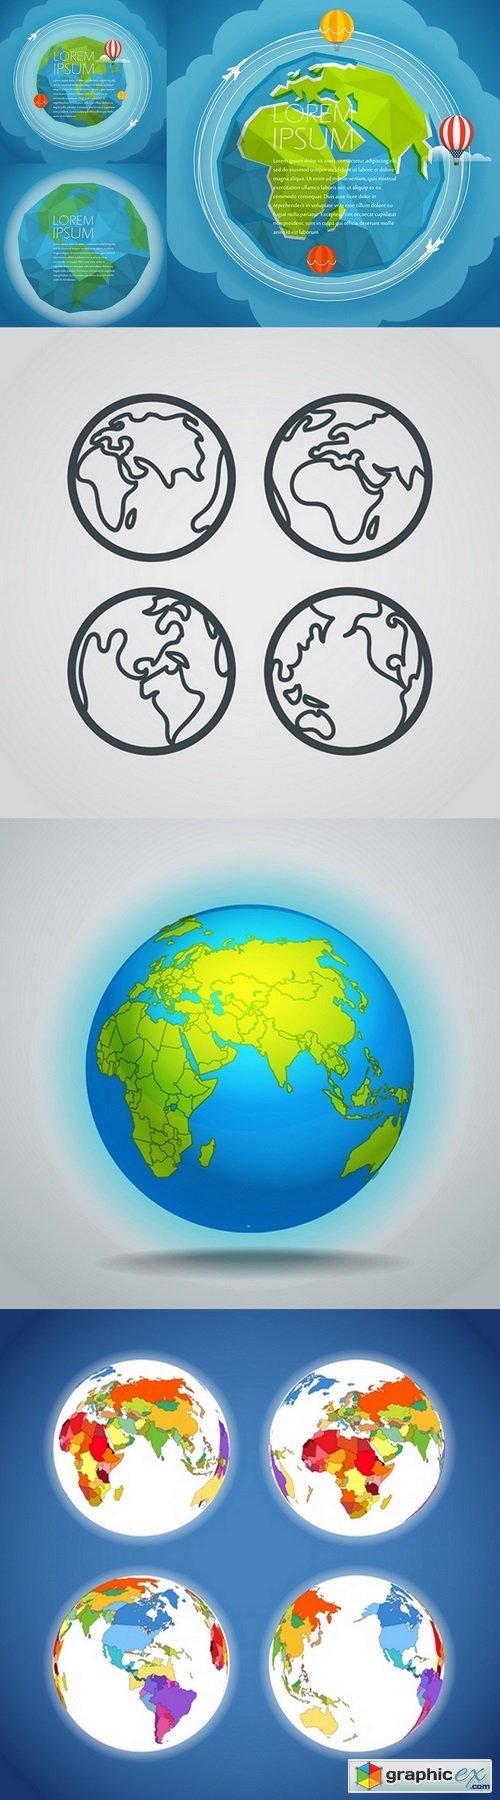 Earth vector illustration. Template for a text